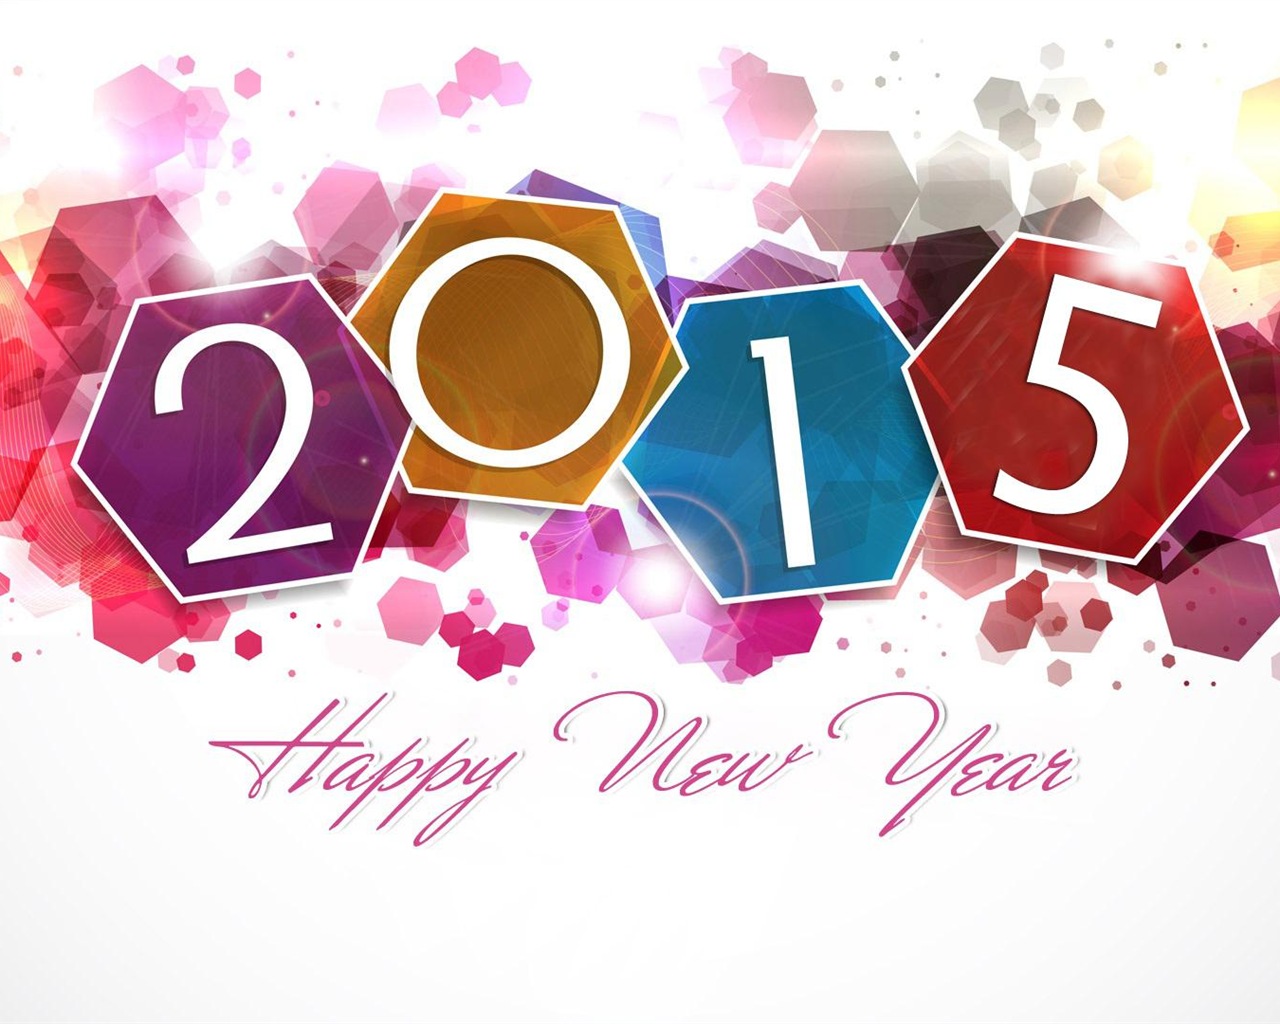 2015 New Year theme HD wallpapers (2) #17 - 1280x1024